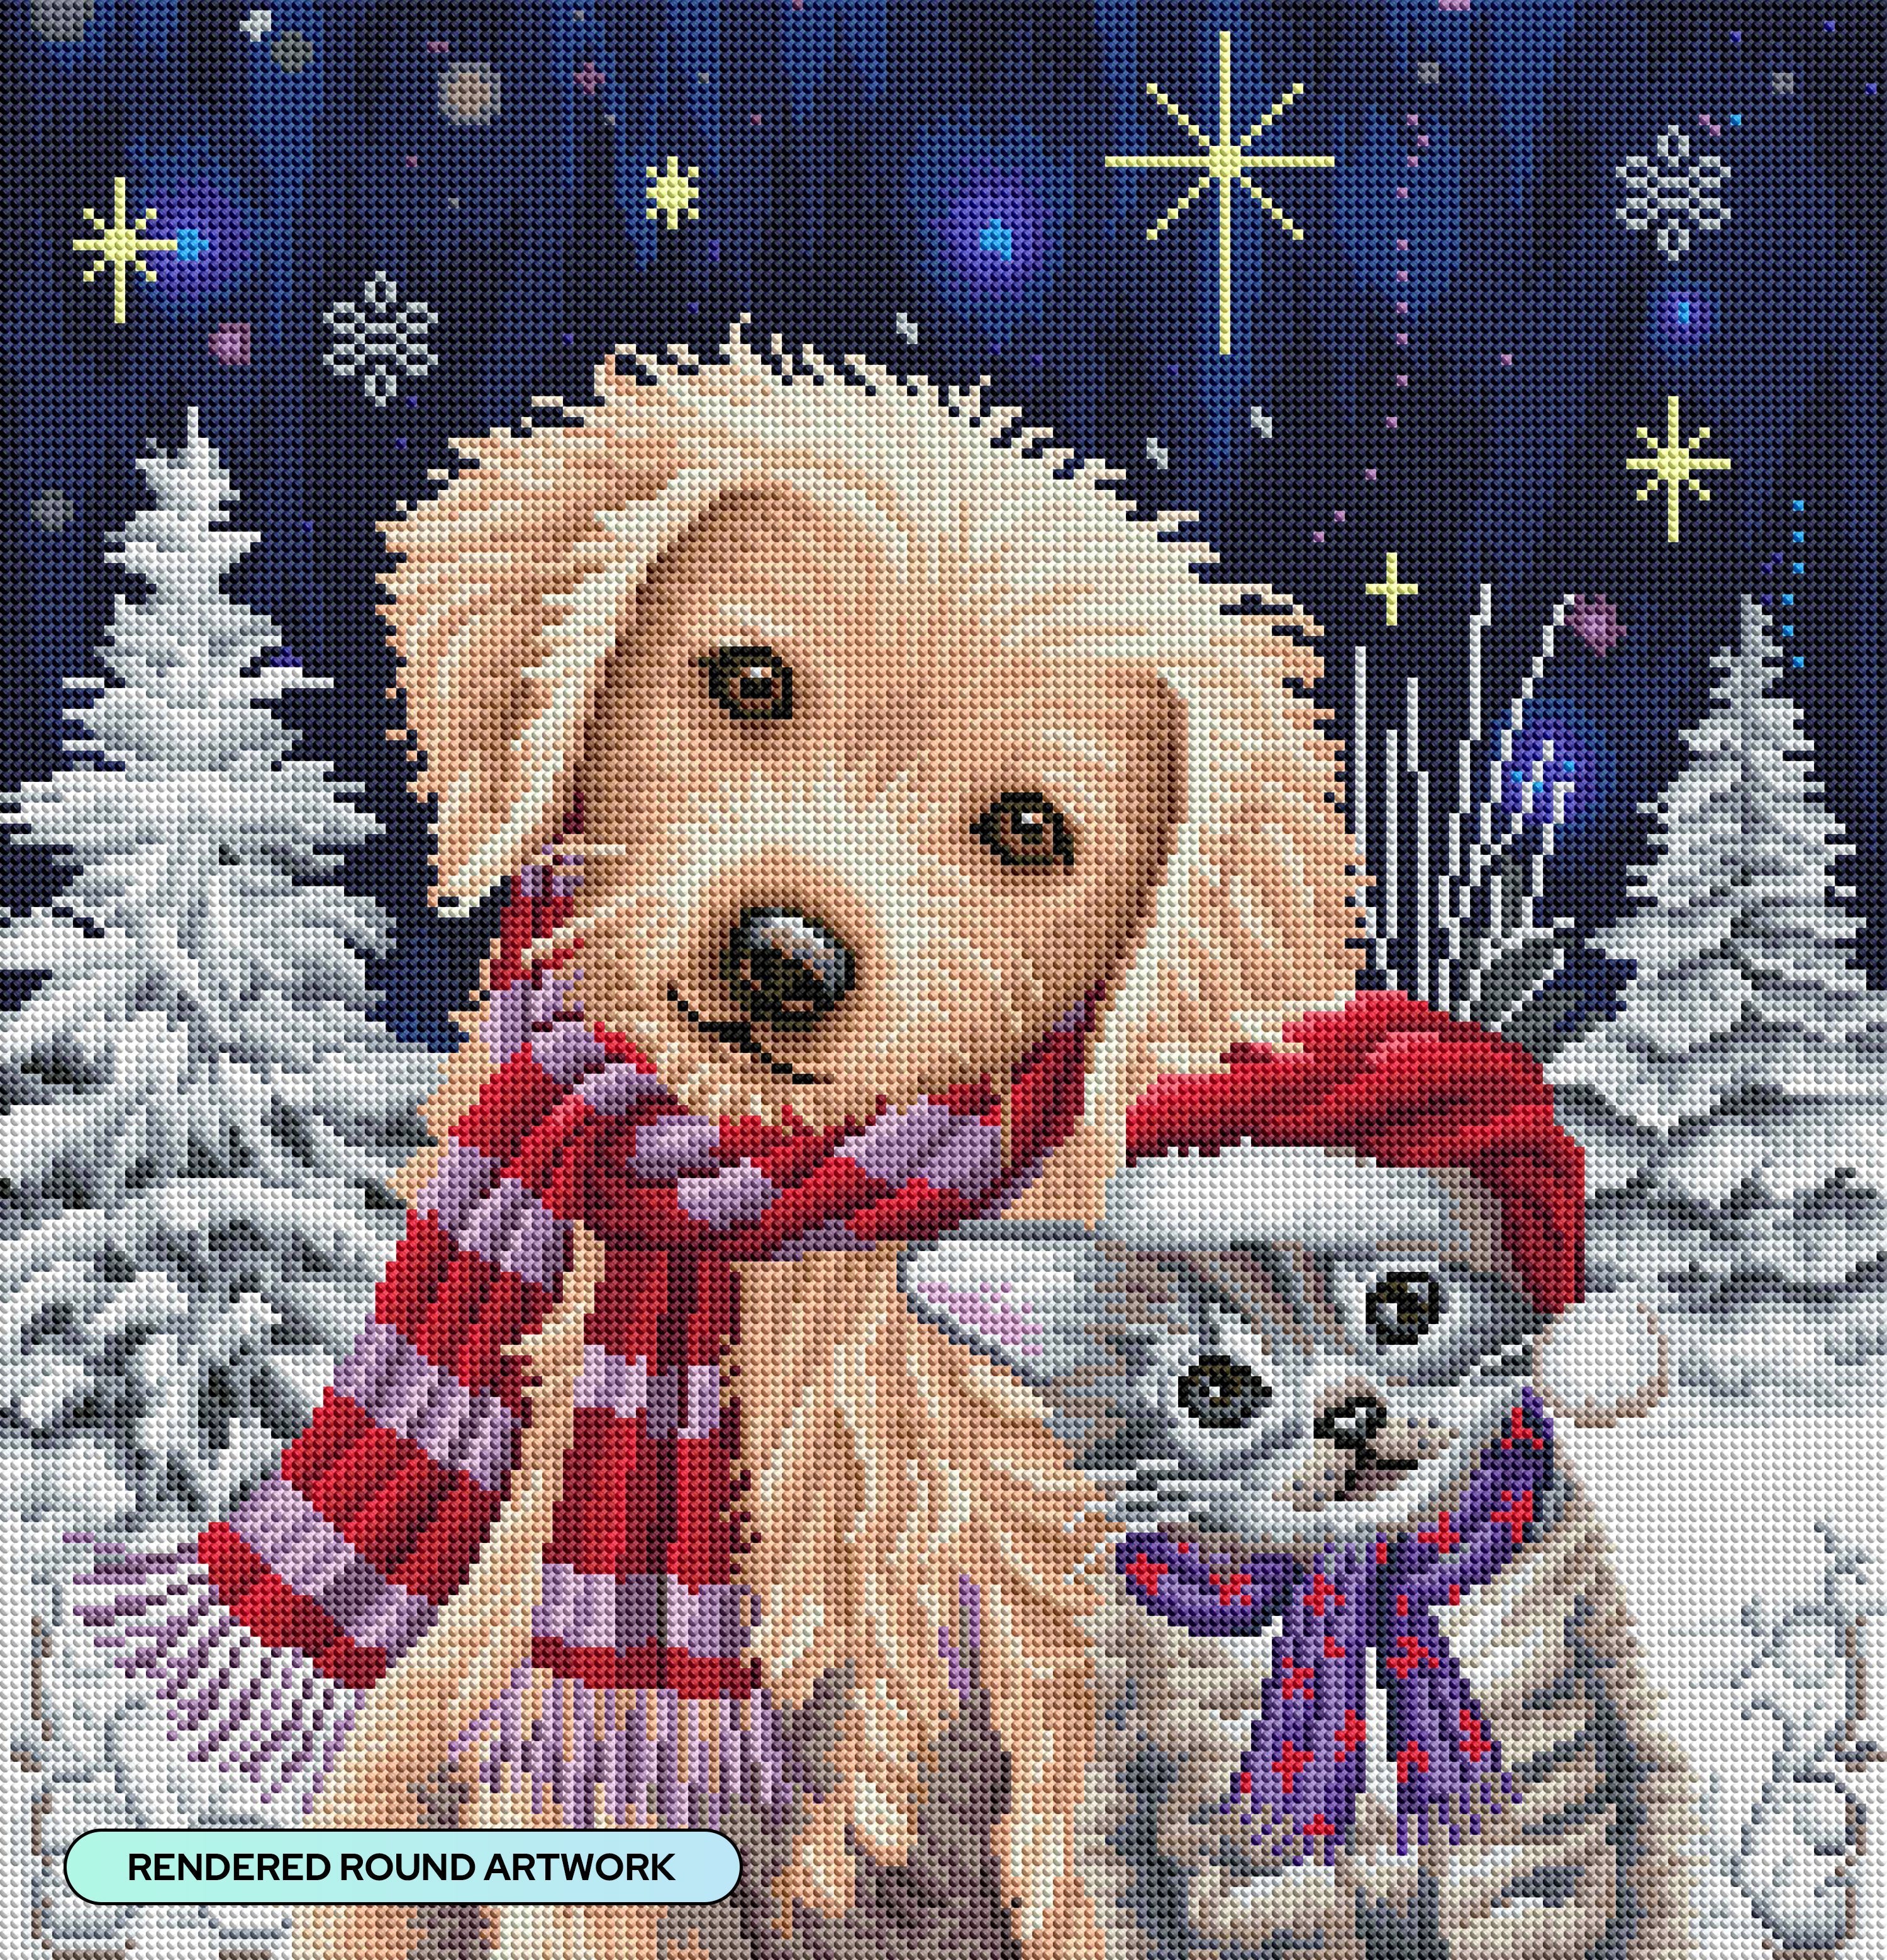 Cat And Dog With Gifts Stock Photo - Download Image Now - Gift